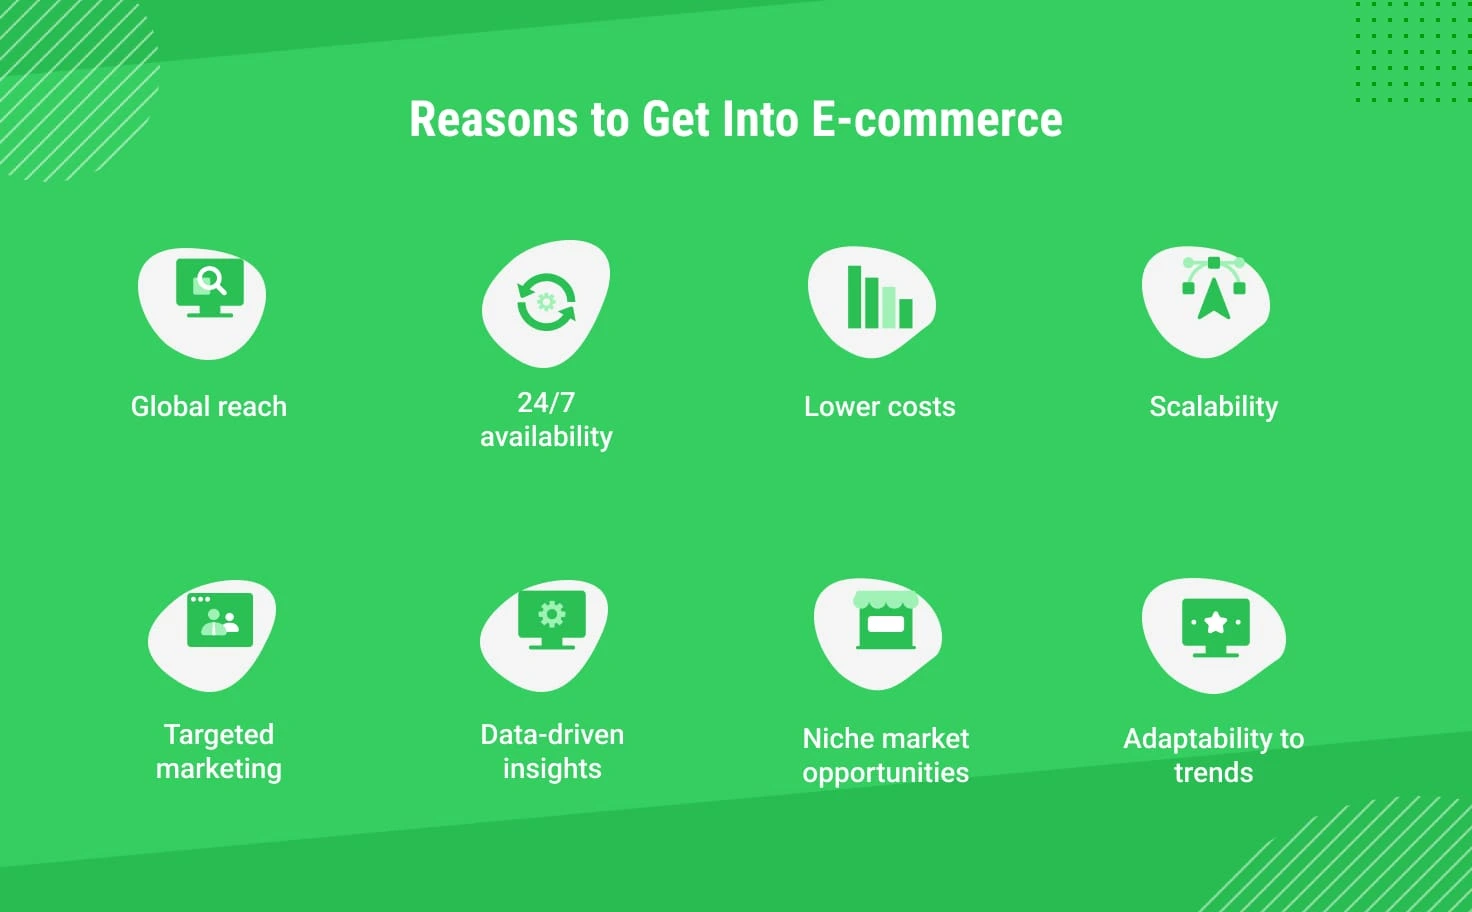 Reasons to get into E-commerce